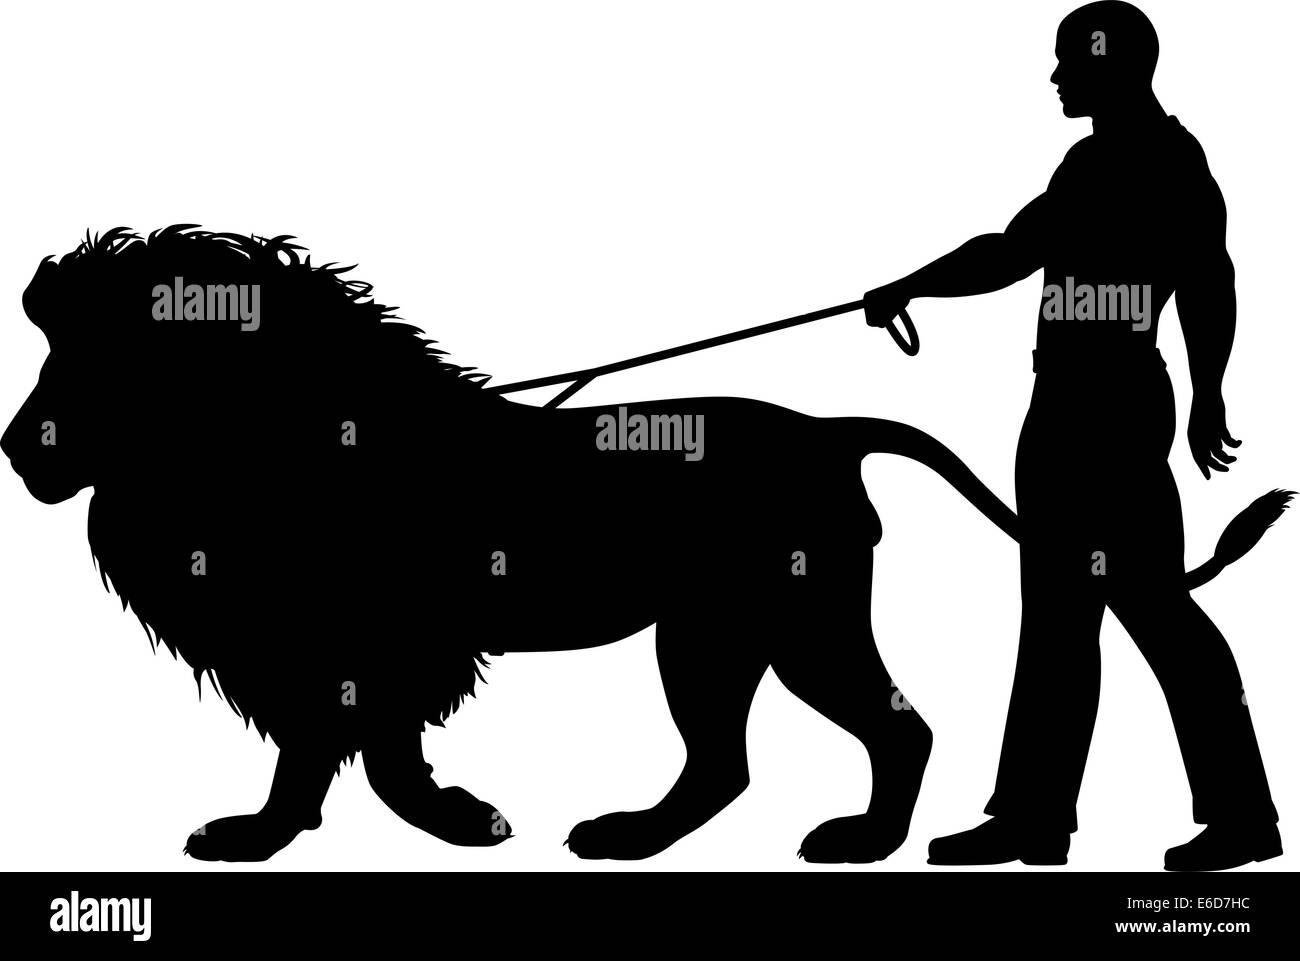 Editable vector silhouette of a man walking a lion on a leash Stock Vector